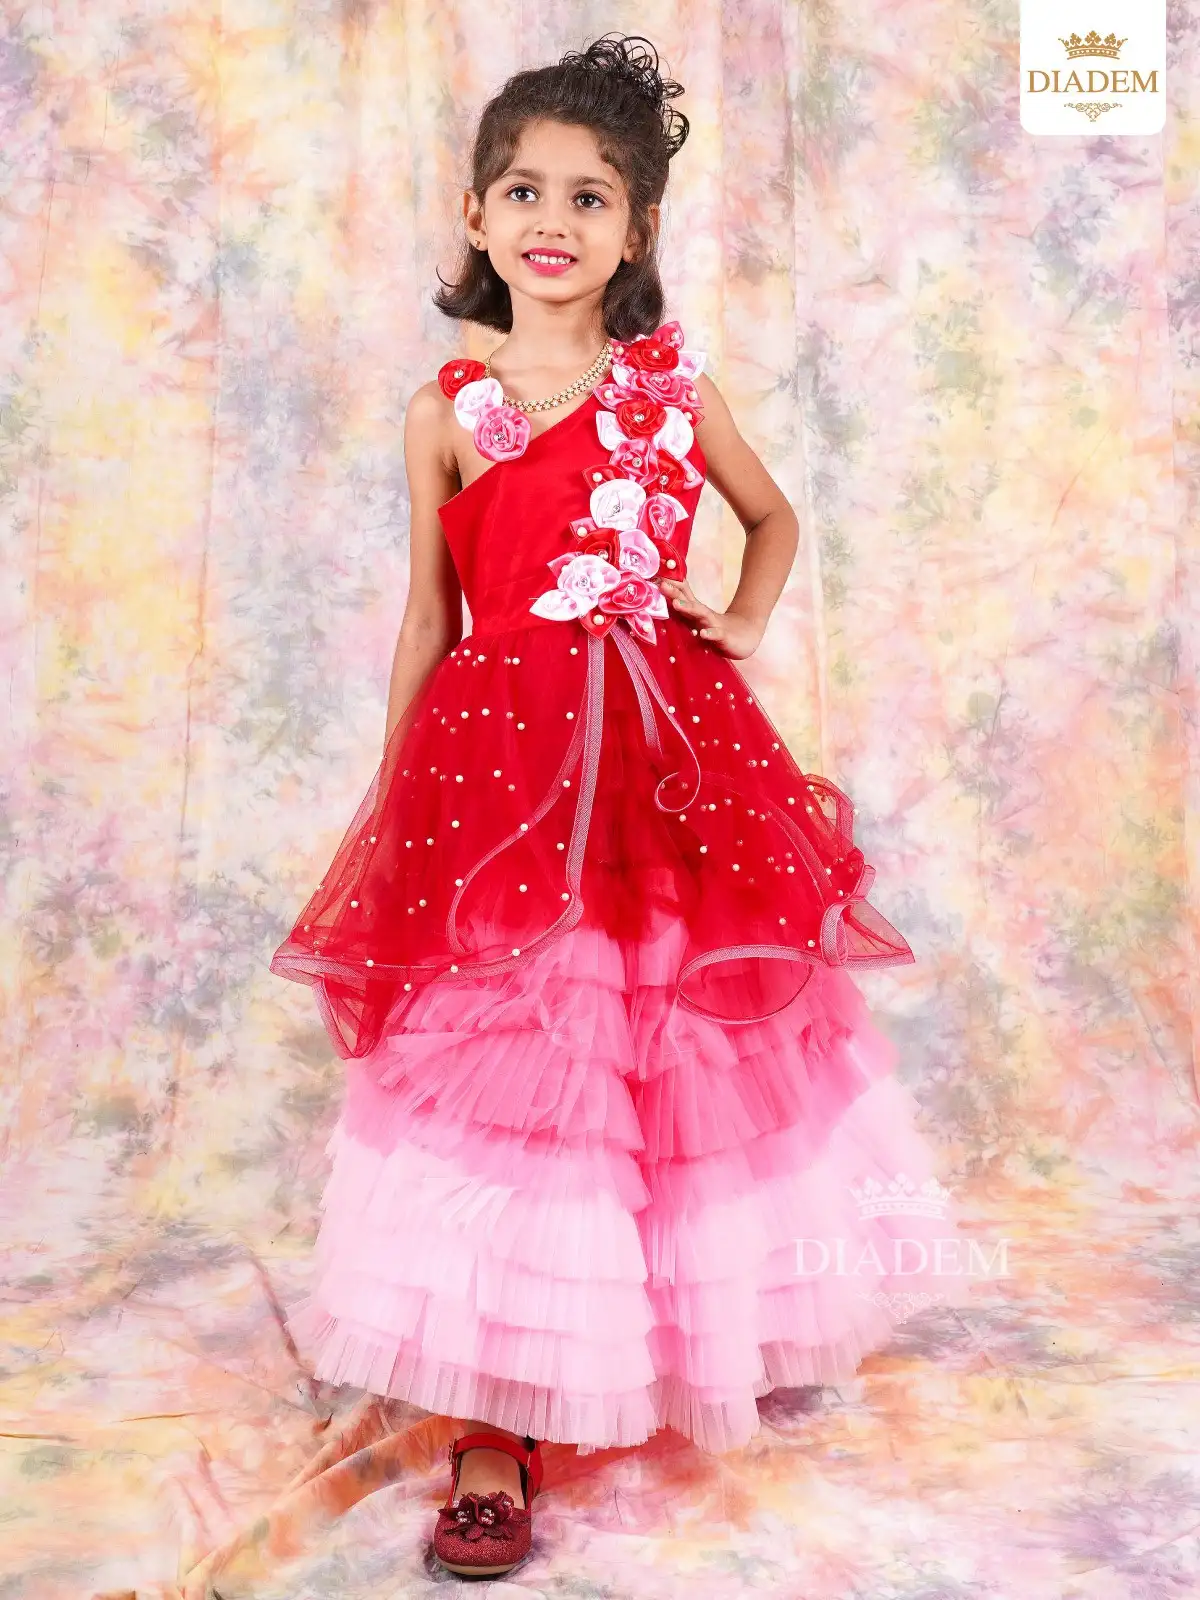 Scarlet Red Gown Embellished In Beads And Floral Design With Ruffled Bottom